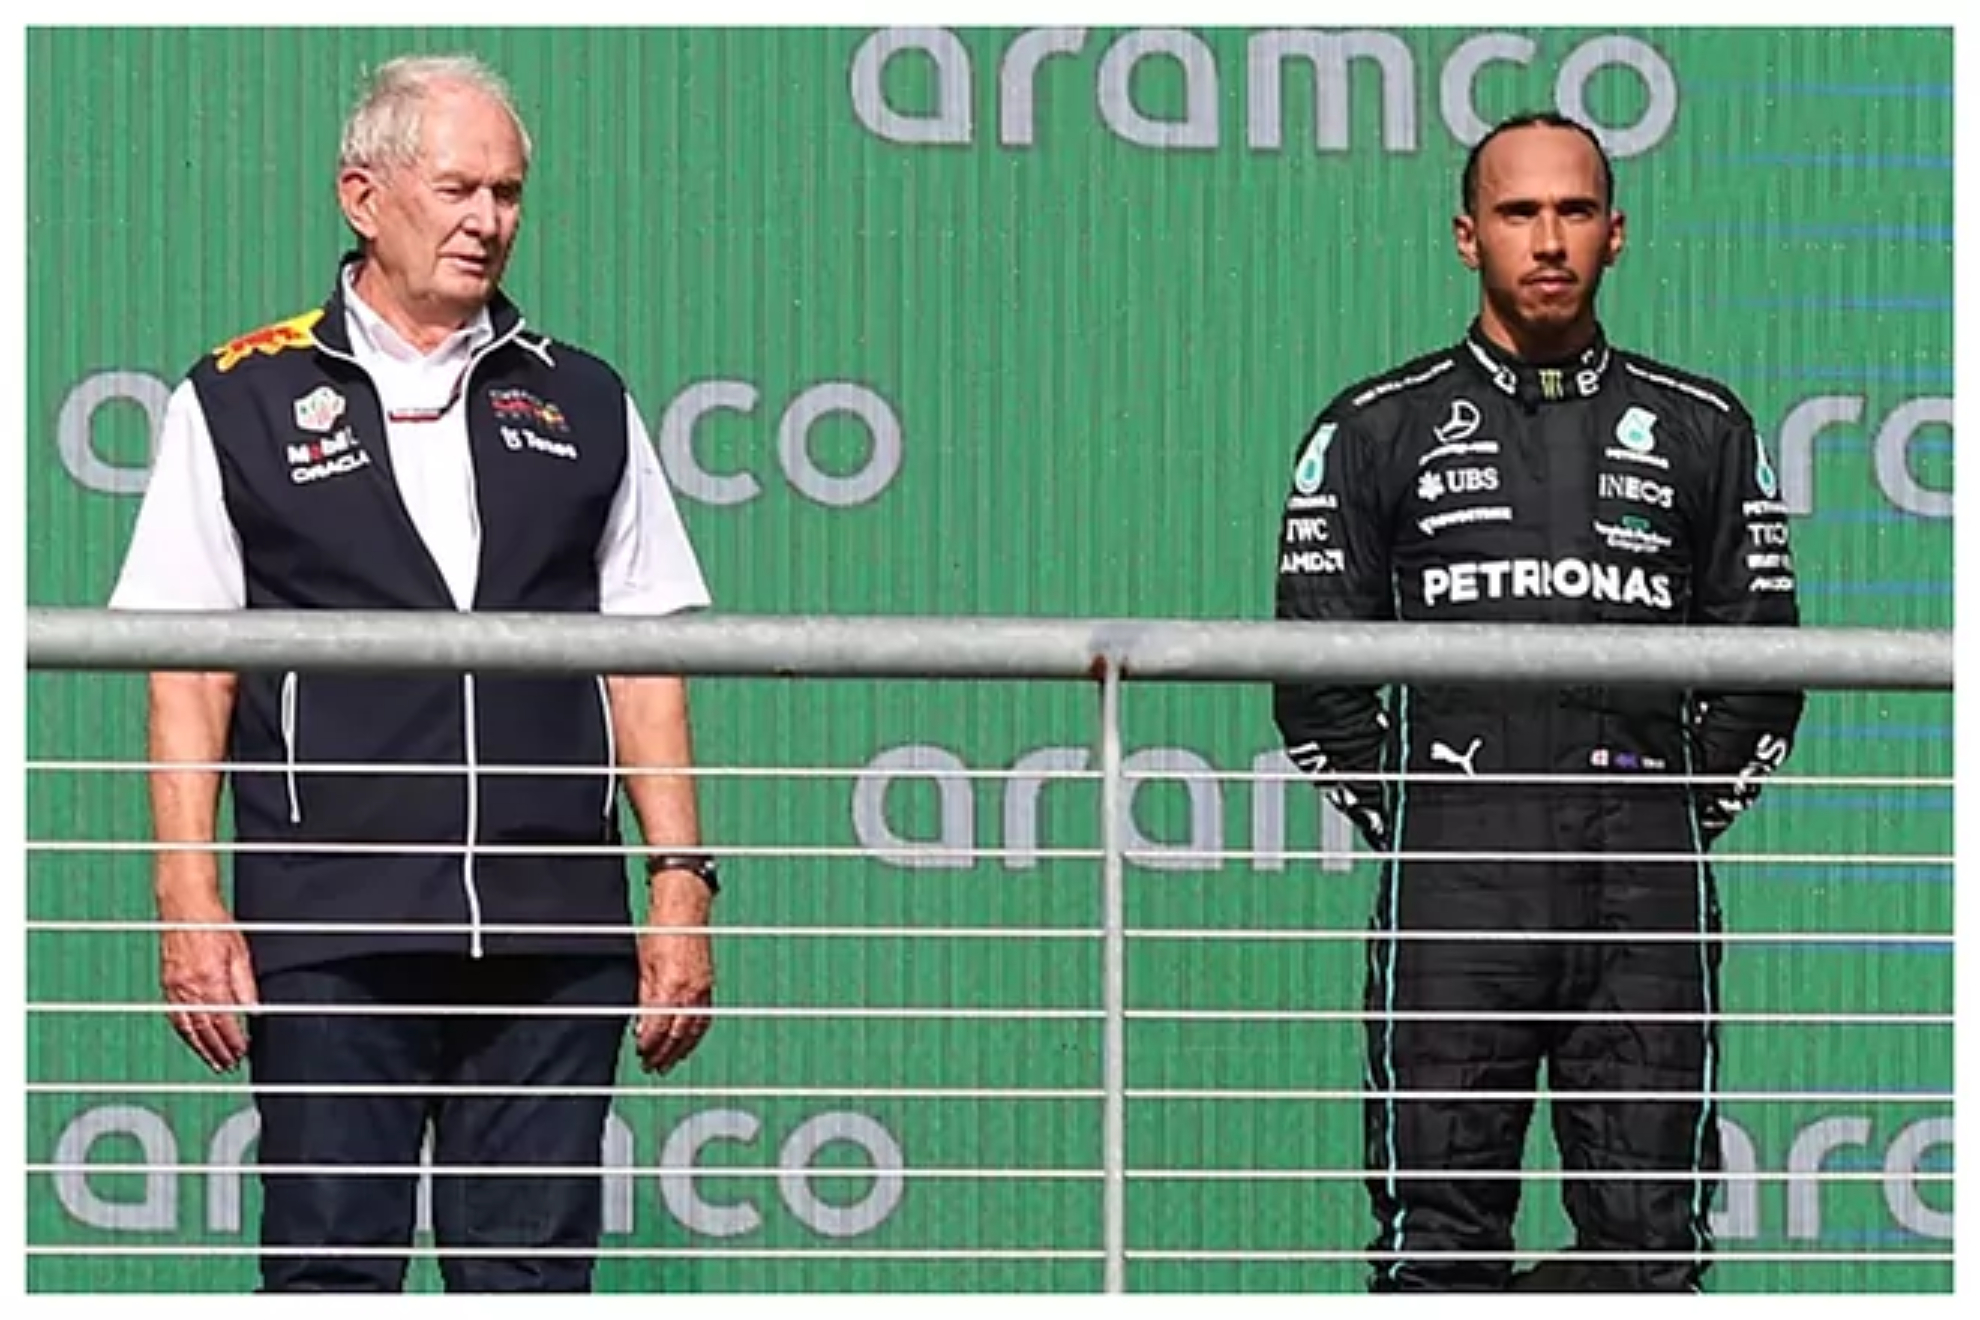 Helmut Marko throws jabs at Lewis Hamilton pointing out his mistakes 'He finally admitted'